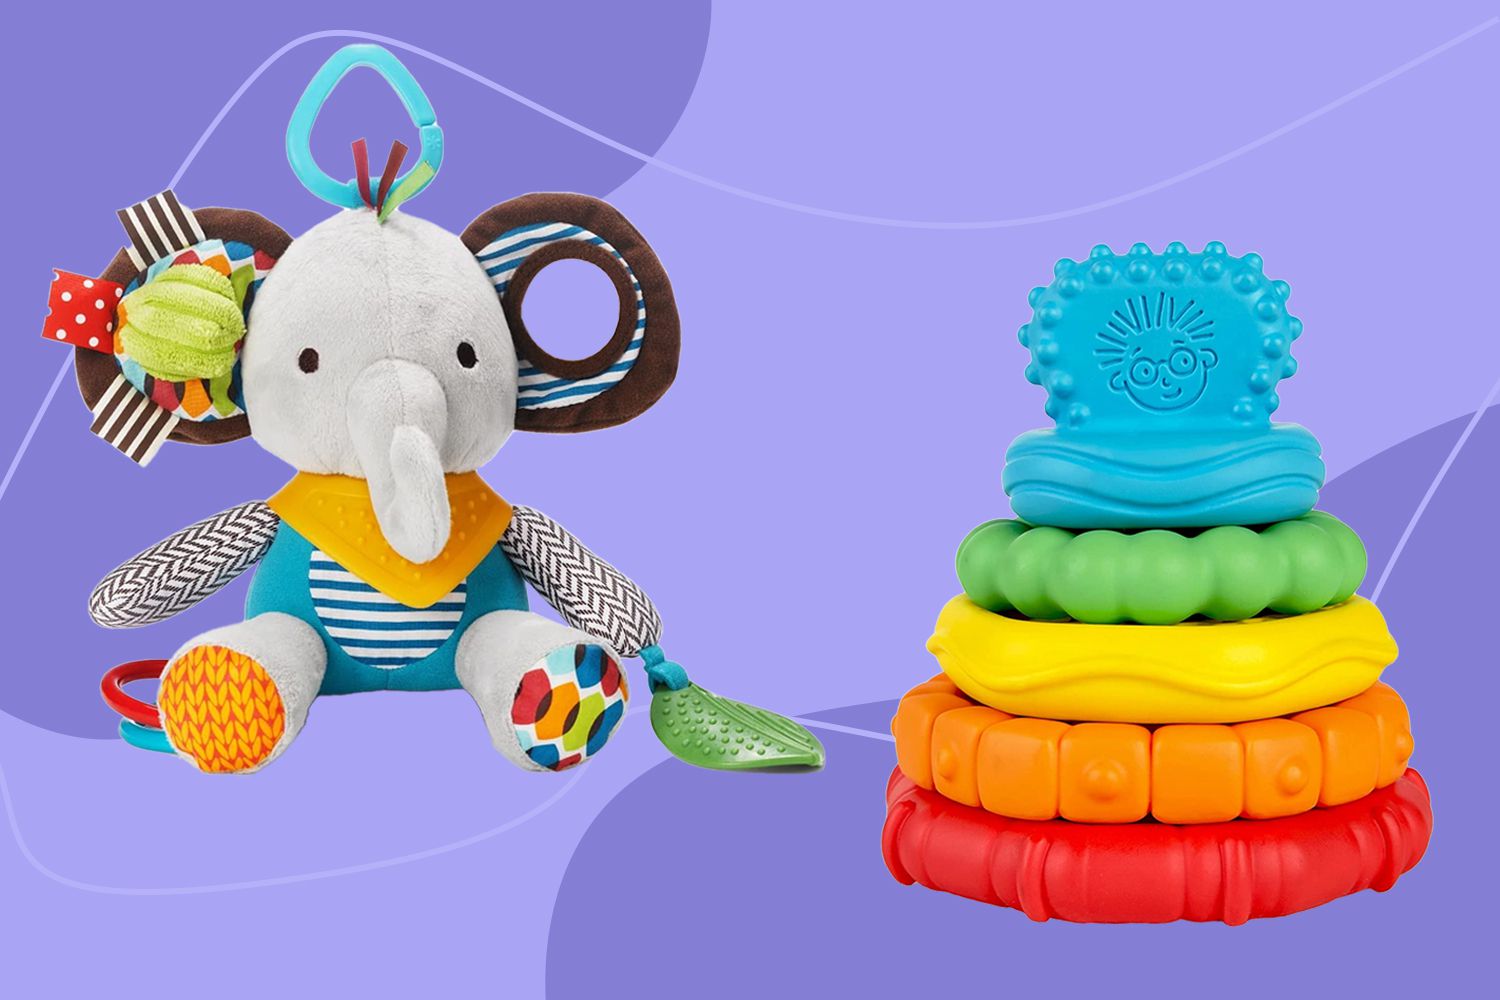 Increase in Infant Deaths Linked to Fisher-Price Rock 'n Play Sleeper Raises Safety Concerns